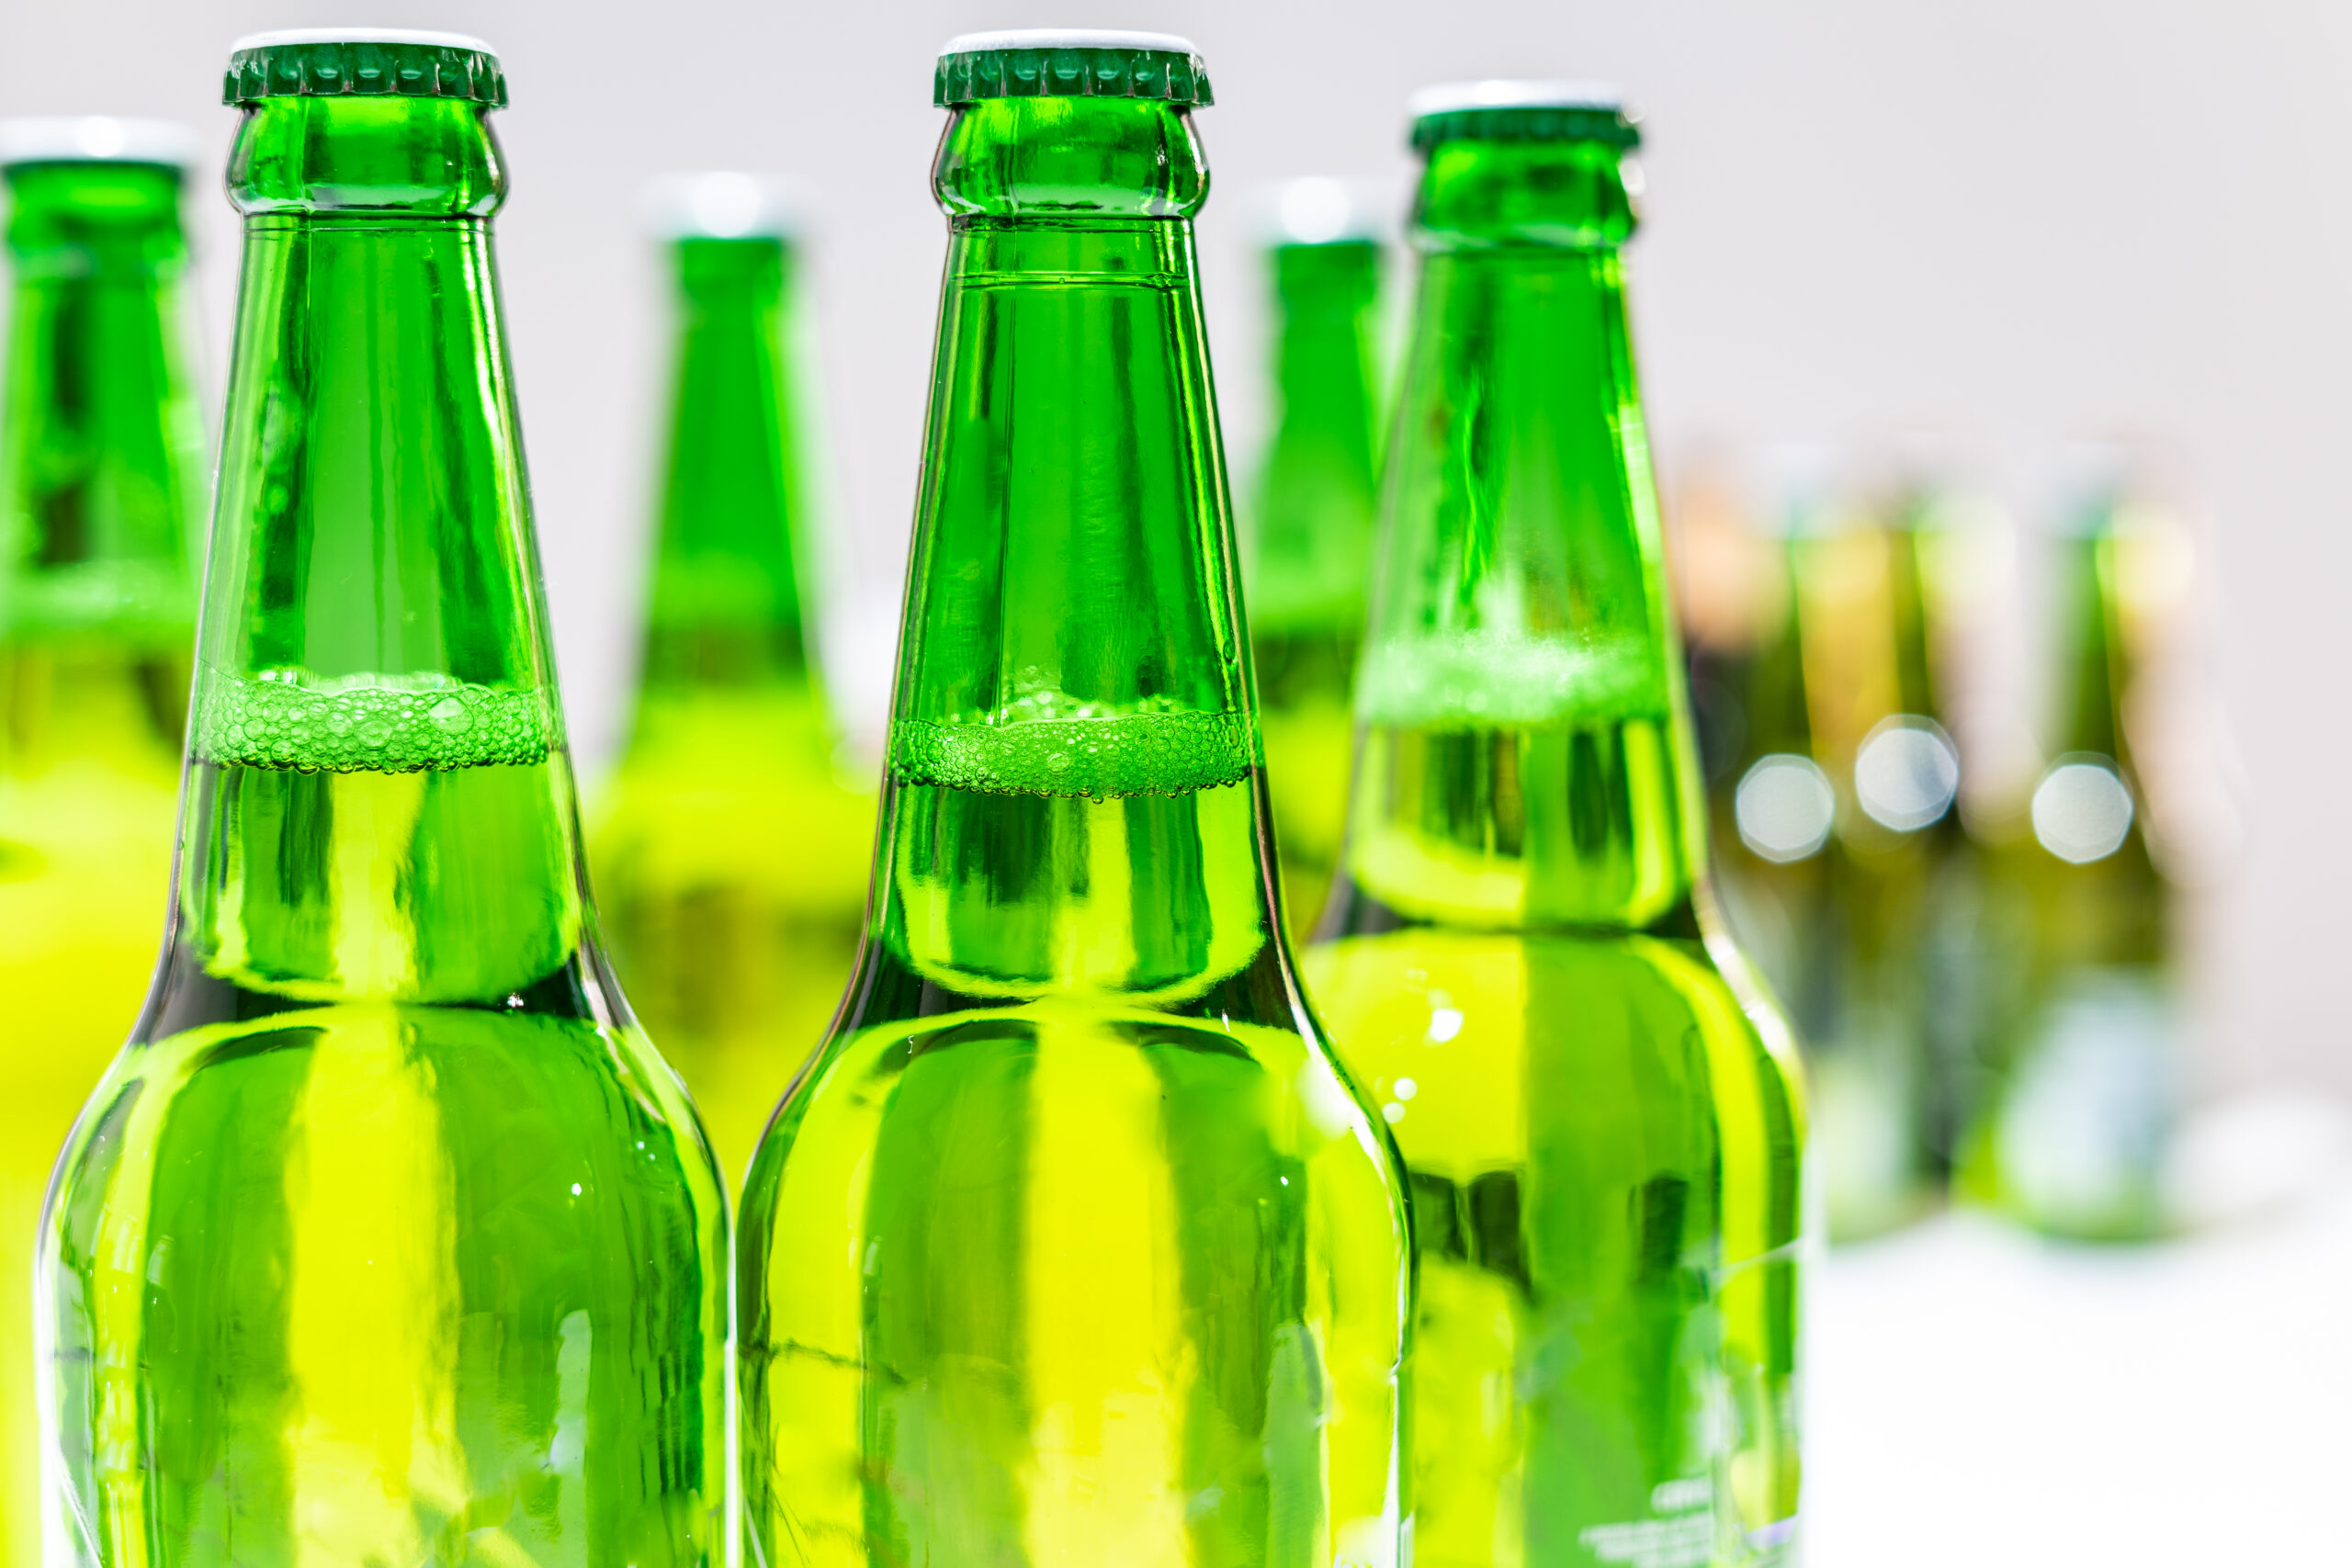 Low- and no-alcohol products price comparison - Pricewatch beer bottles